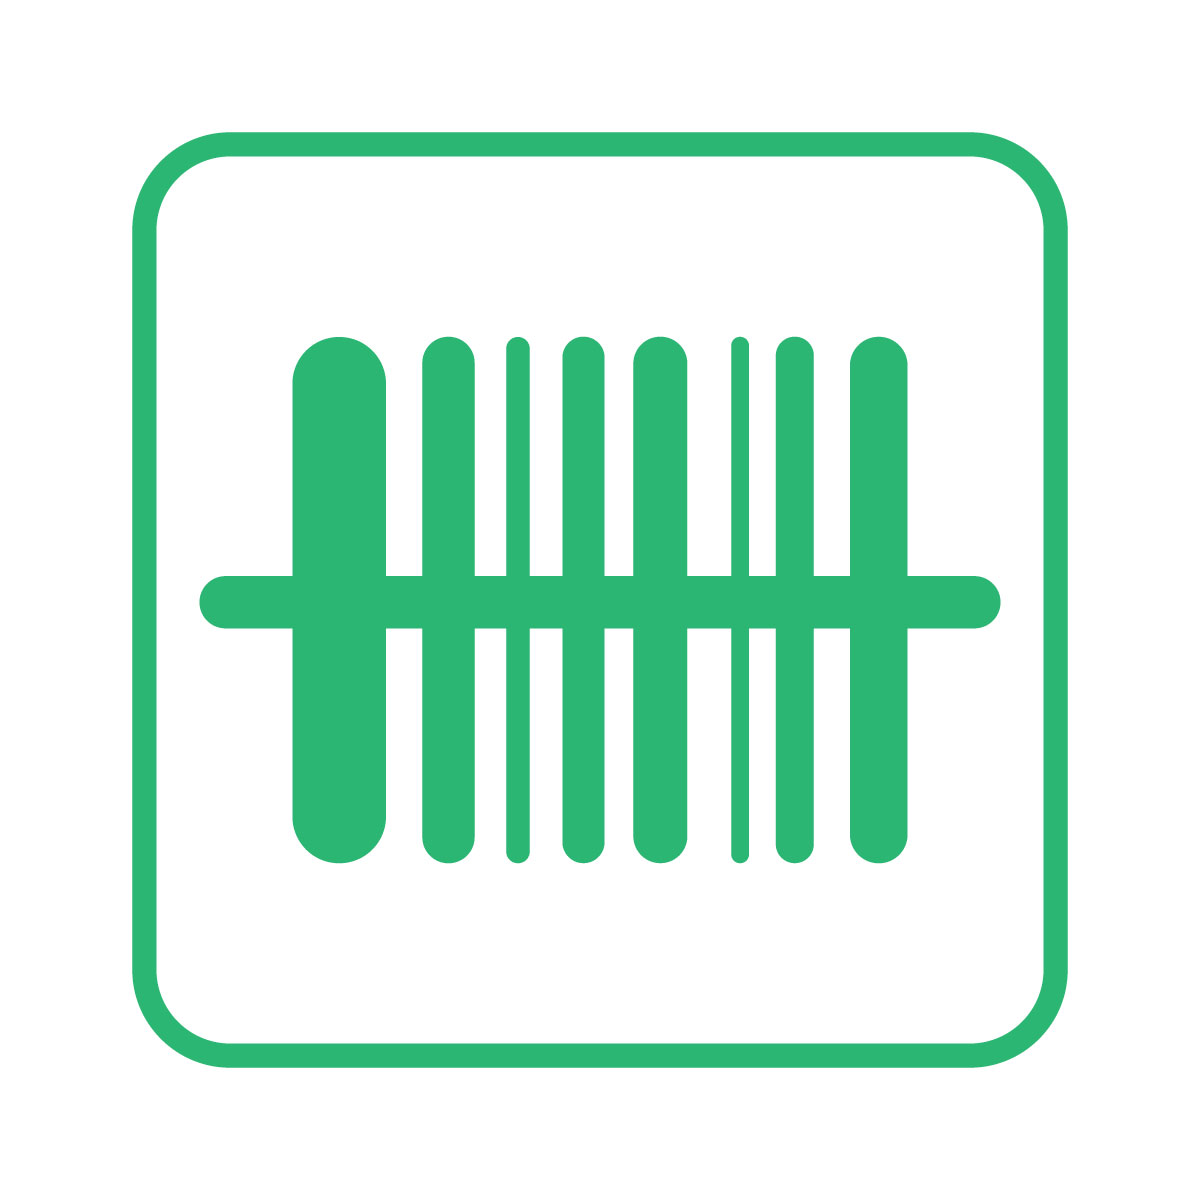 Barcode Man For DYMO Shopify App